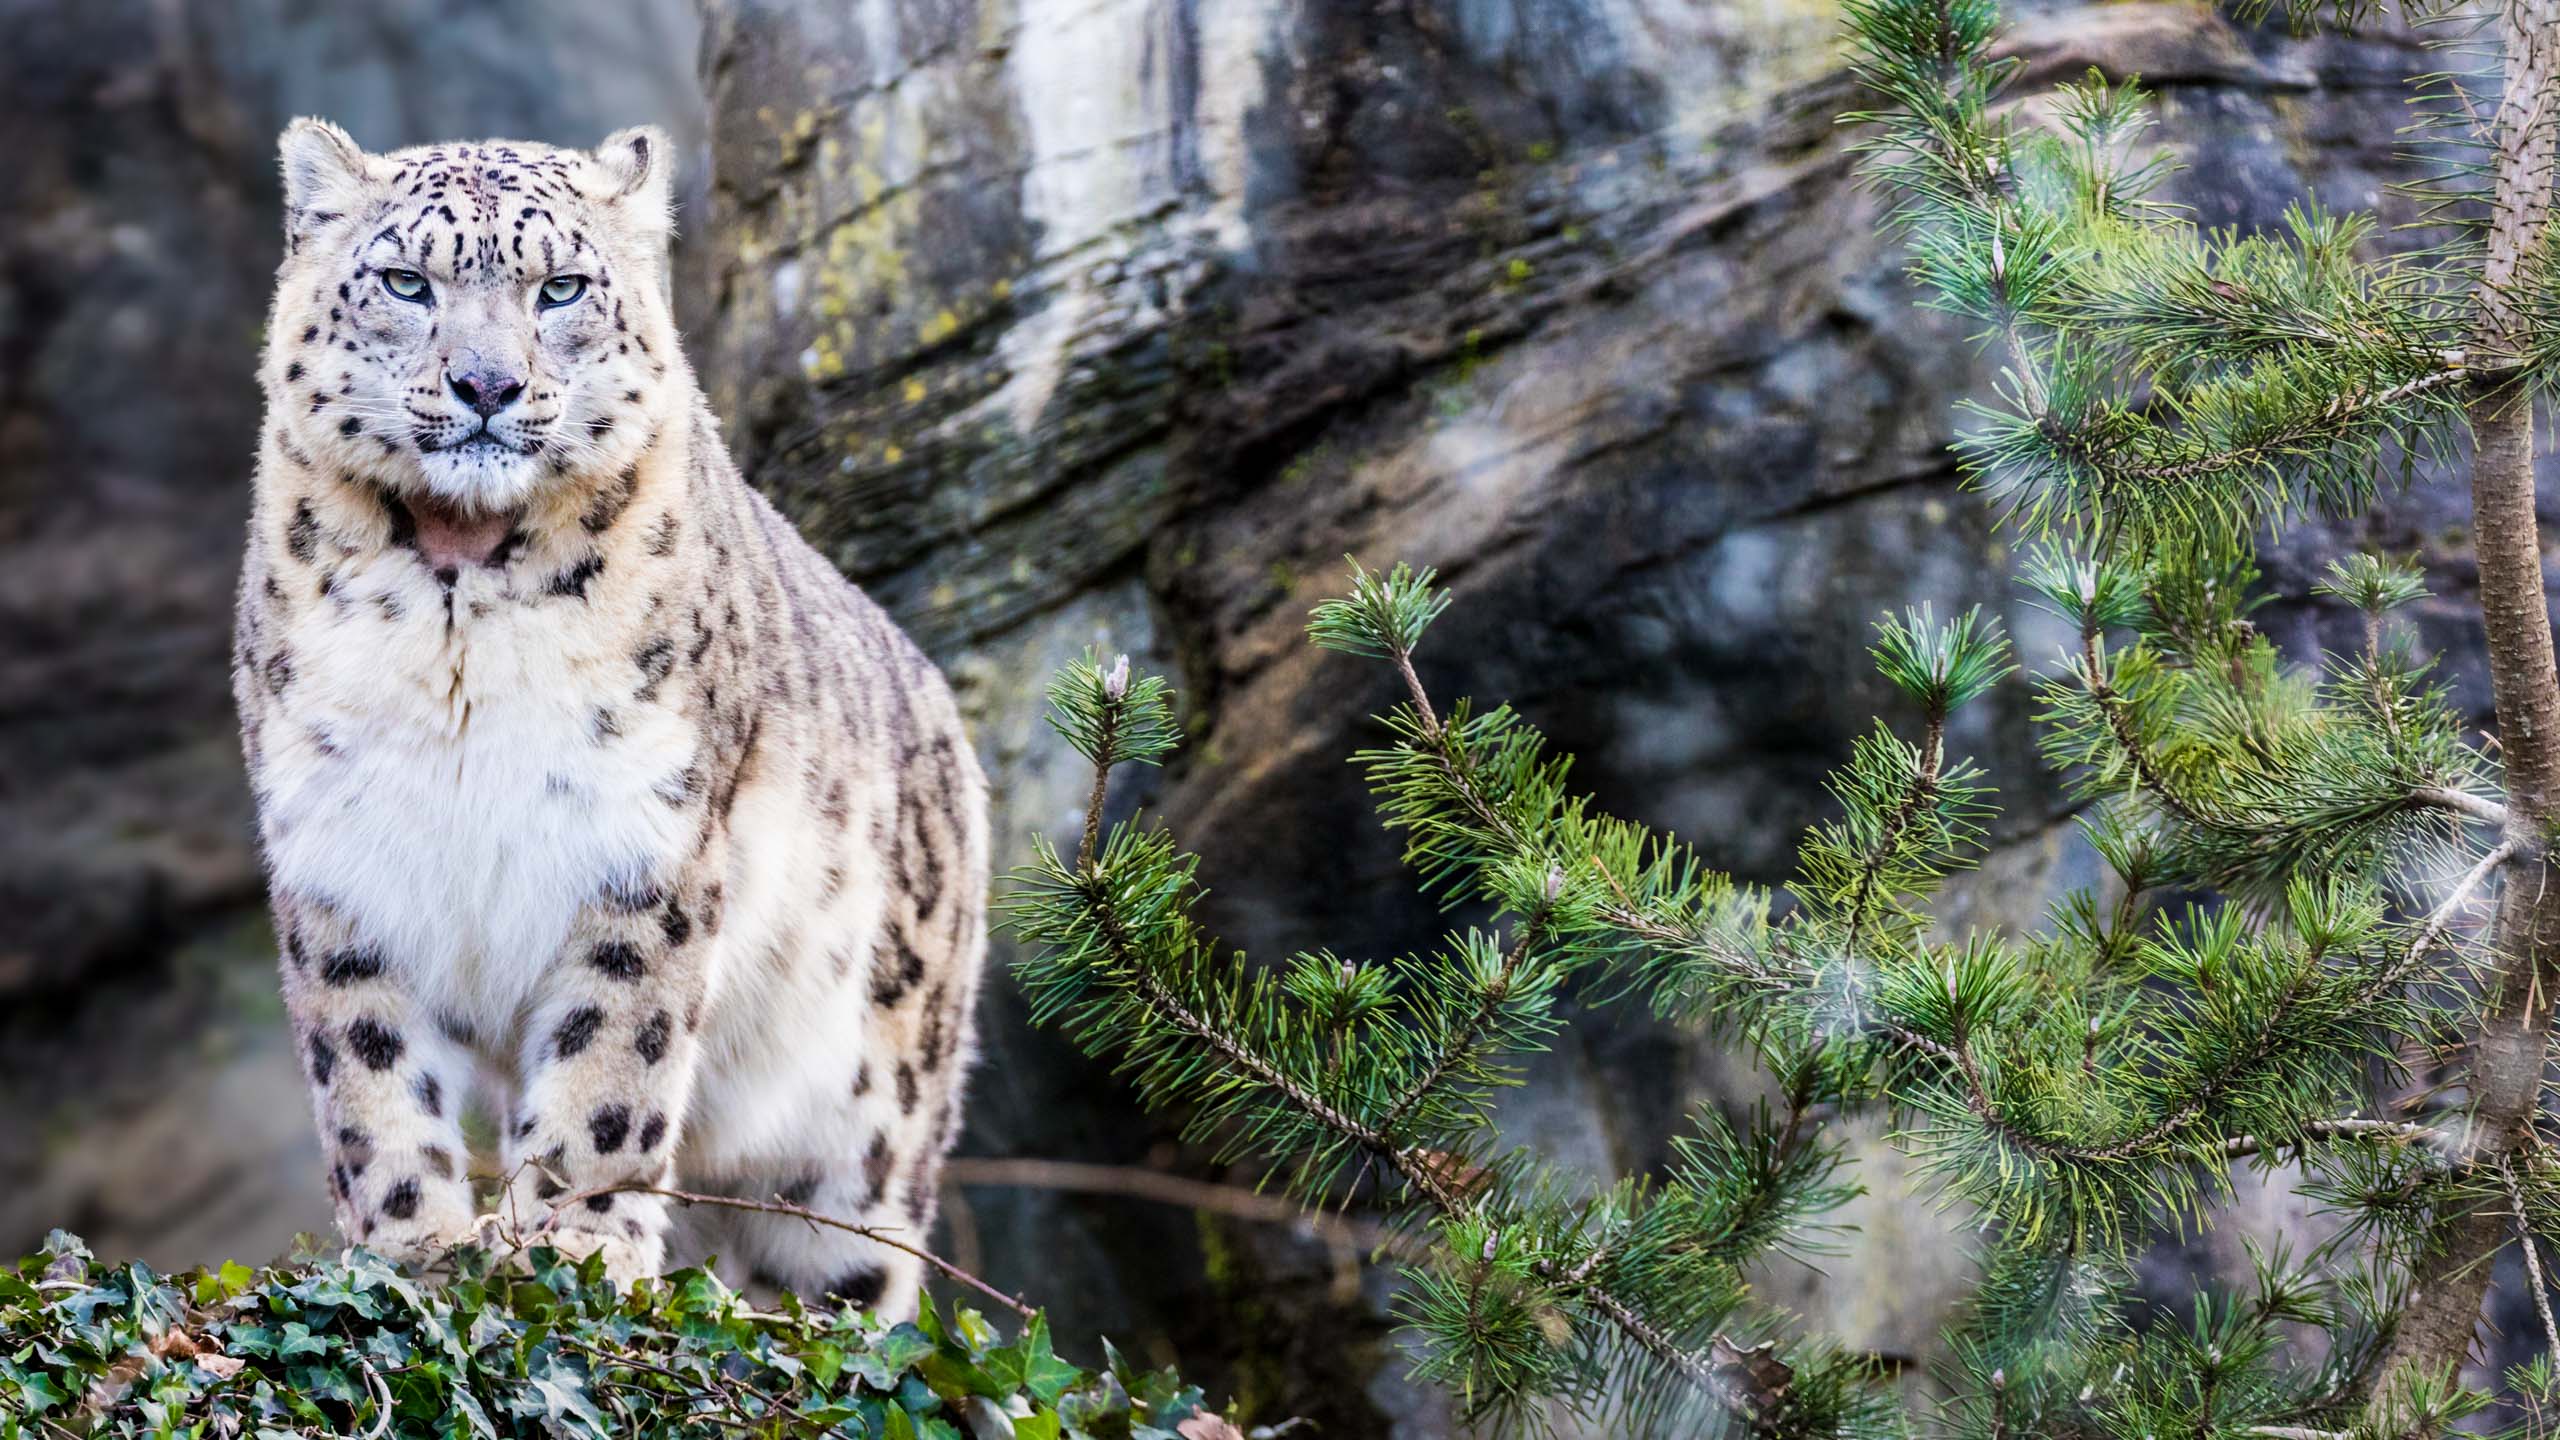 Snow leopard stand on rocky outcrop in forest